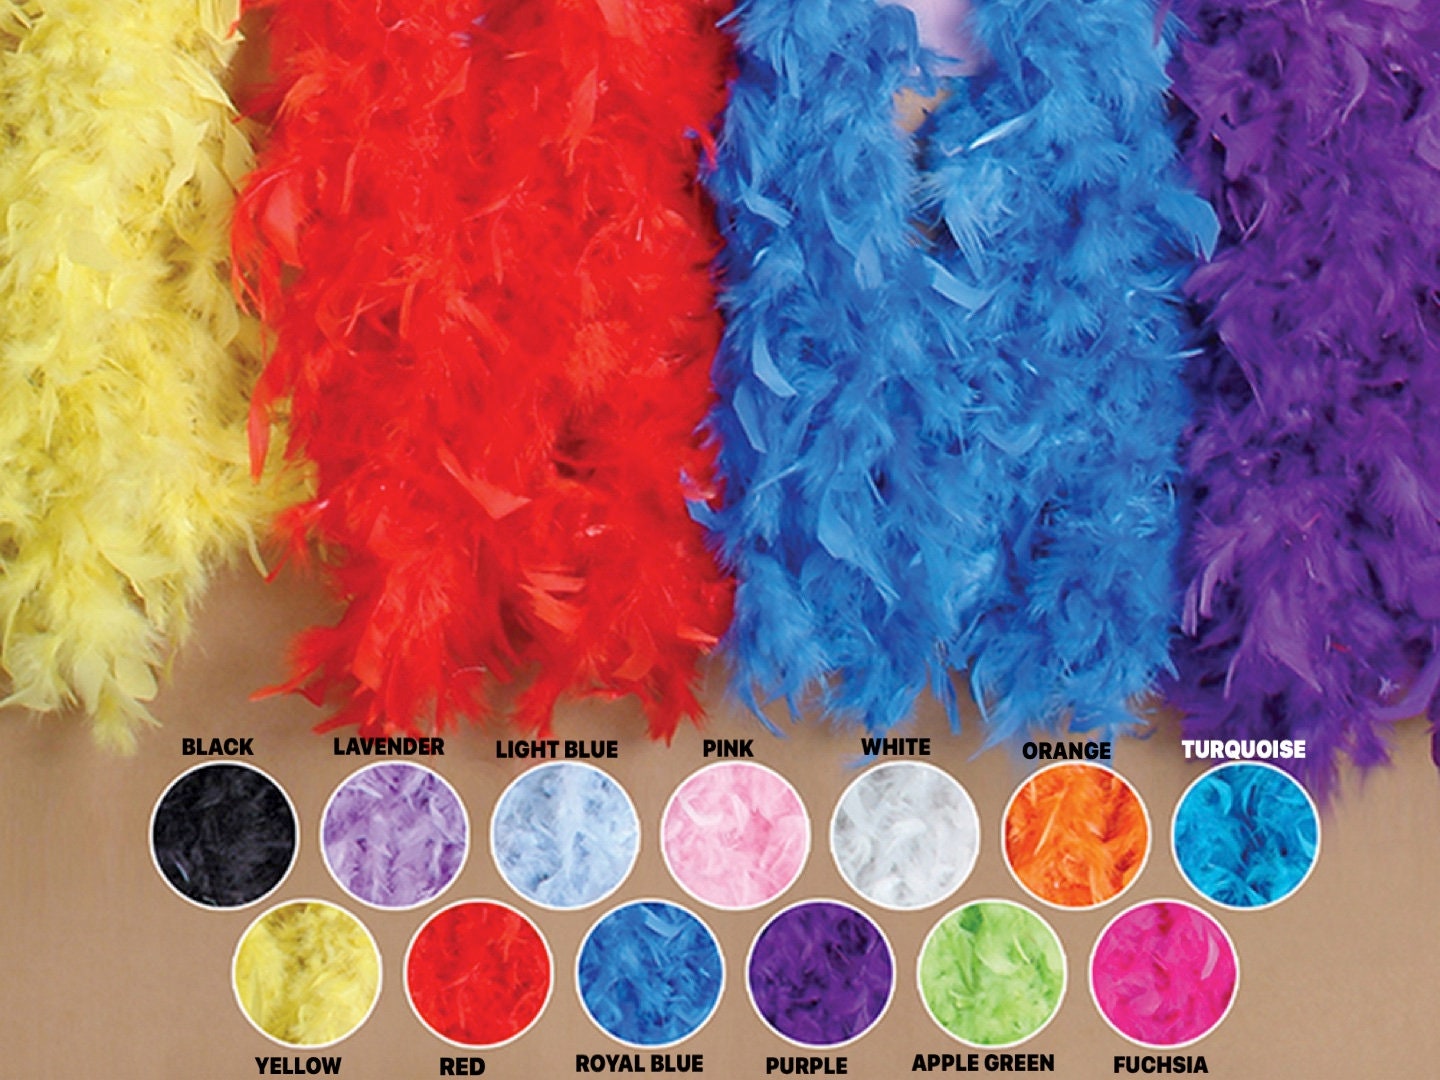 Reveler Party Supplies Reveler Pink Feather Boa | Fun Boas for Adults | A Grade Pink Feathers | The Perfect Pink Boa